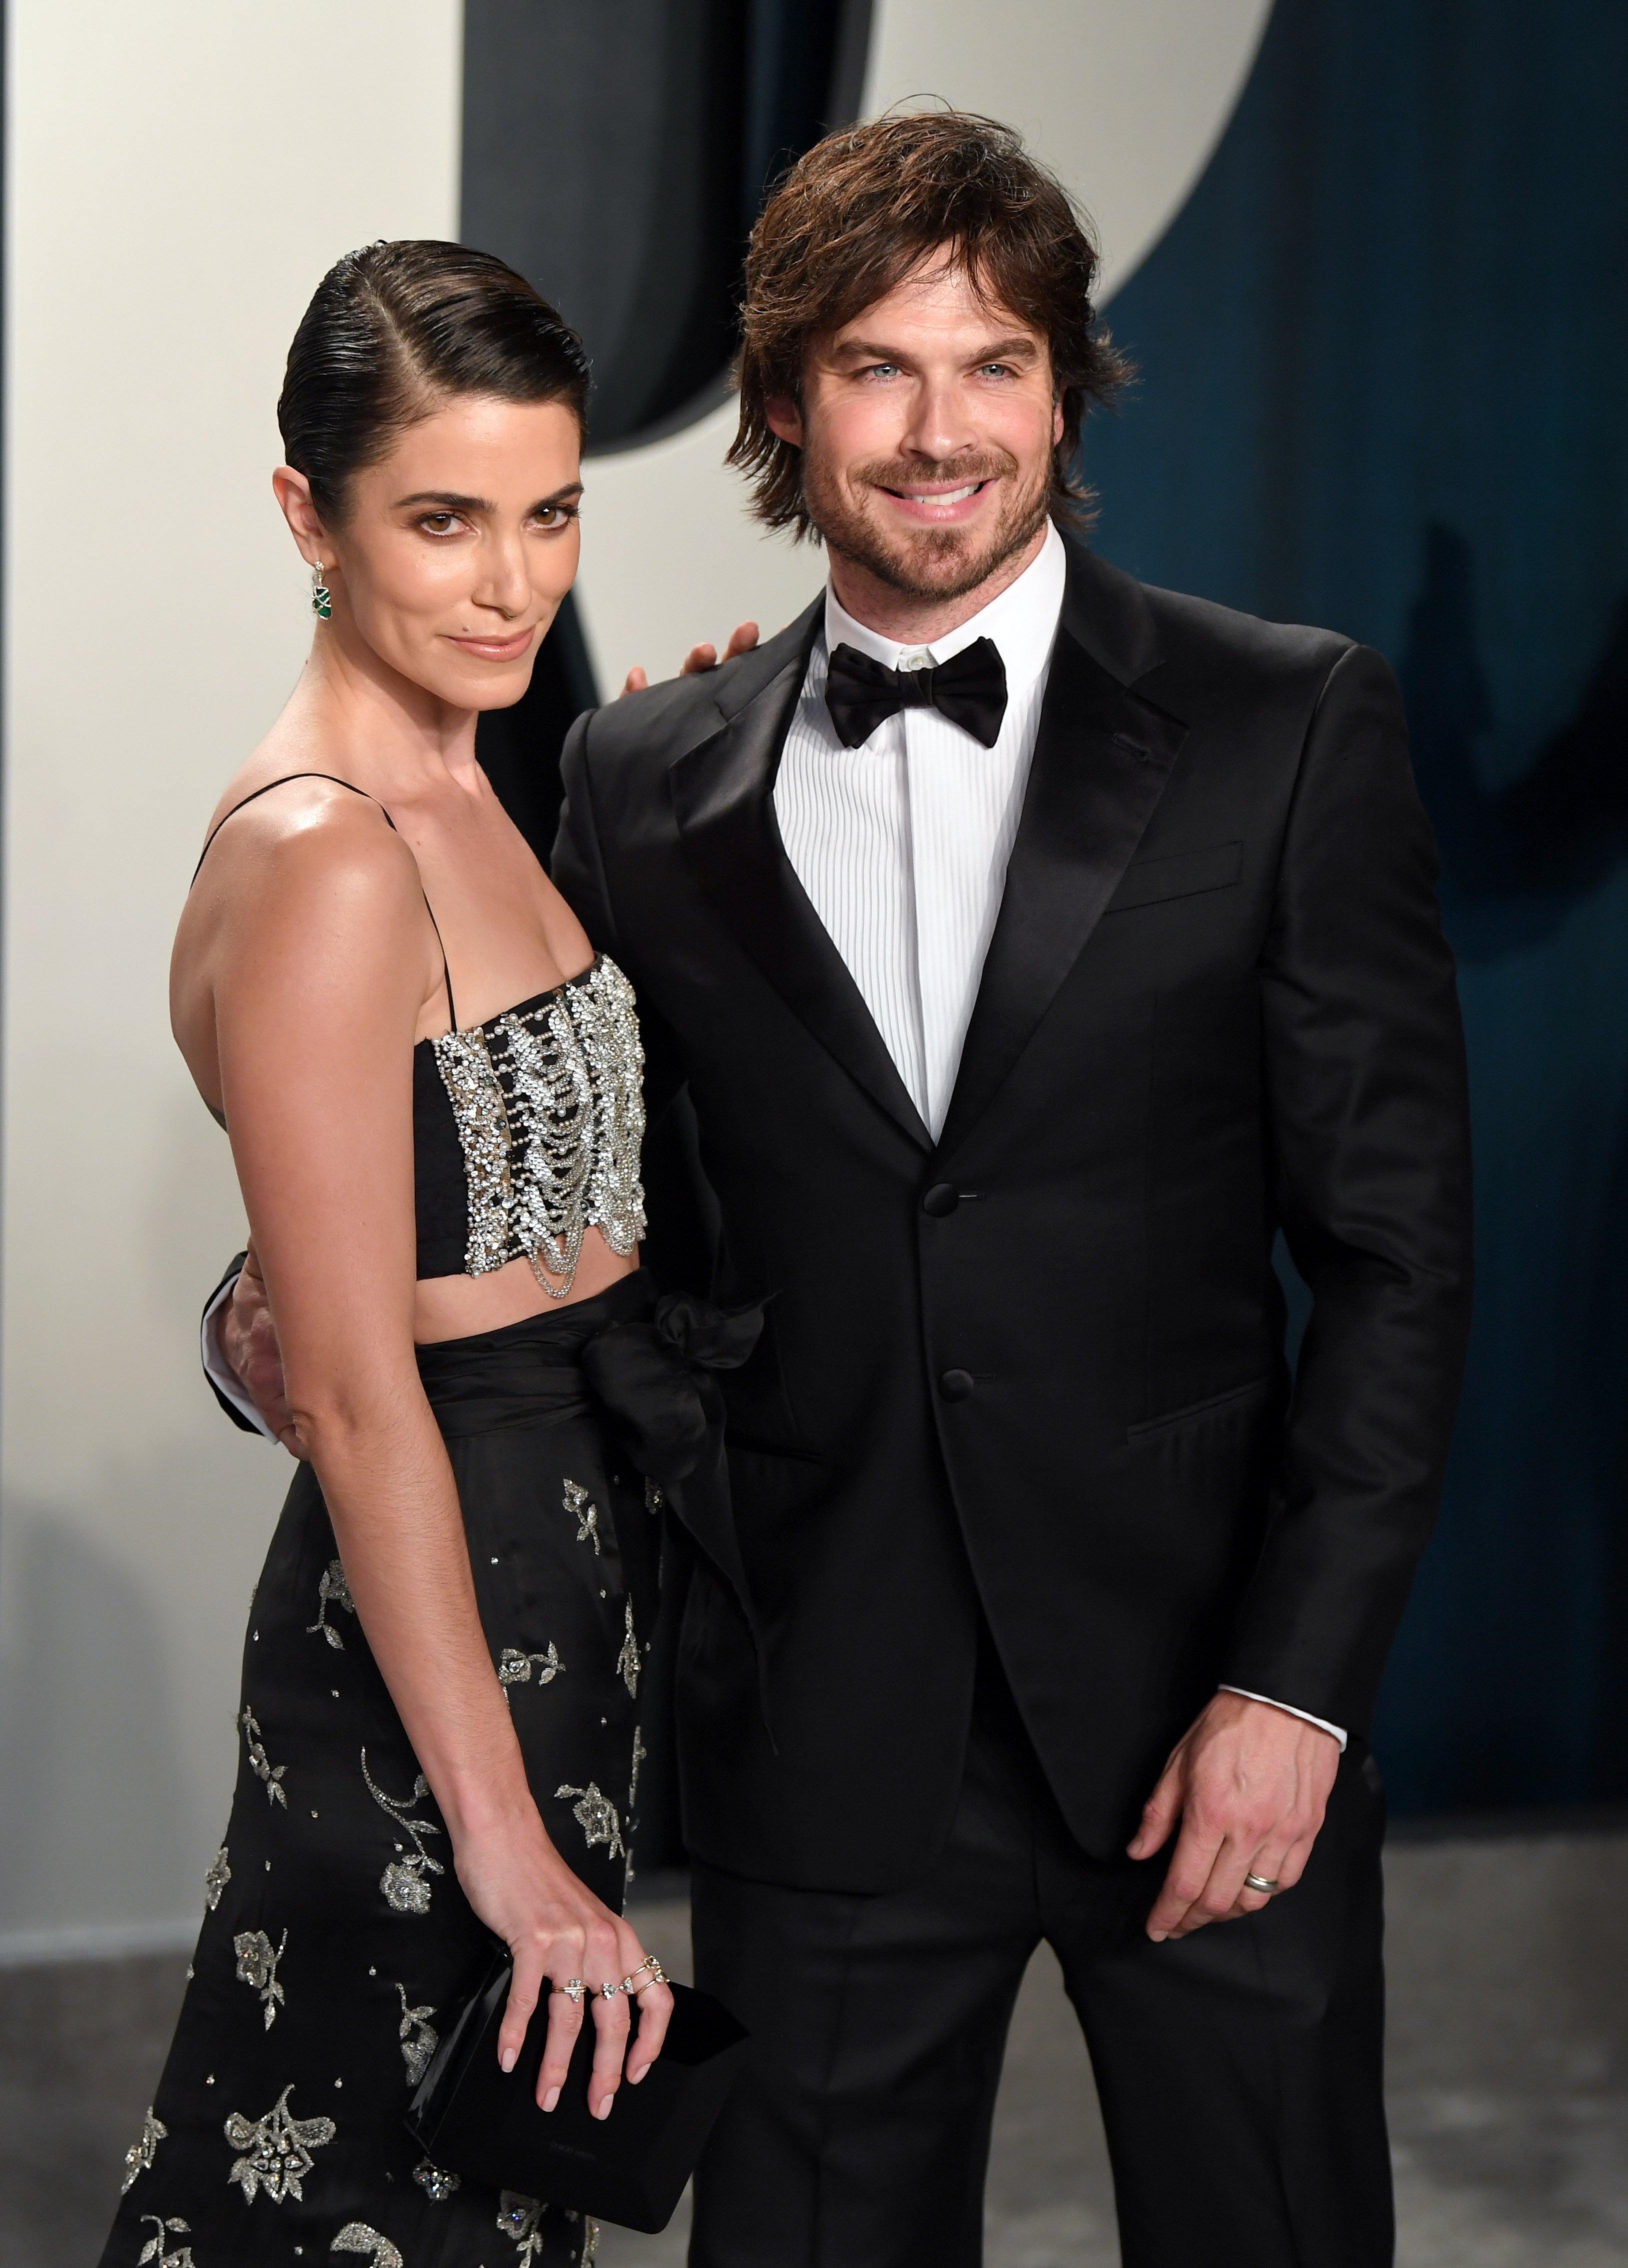 Nikki Reed and Ian Somerhalder attend the 2020 Vanity Fair Oscar Party at Wallis Annenberg Center for the Performing Arts in Beverly Hills, California on February 09, 2020 | Source: Getty Images